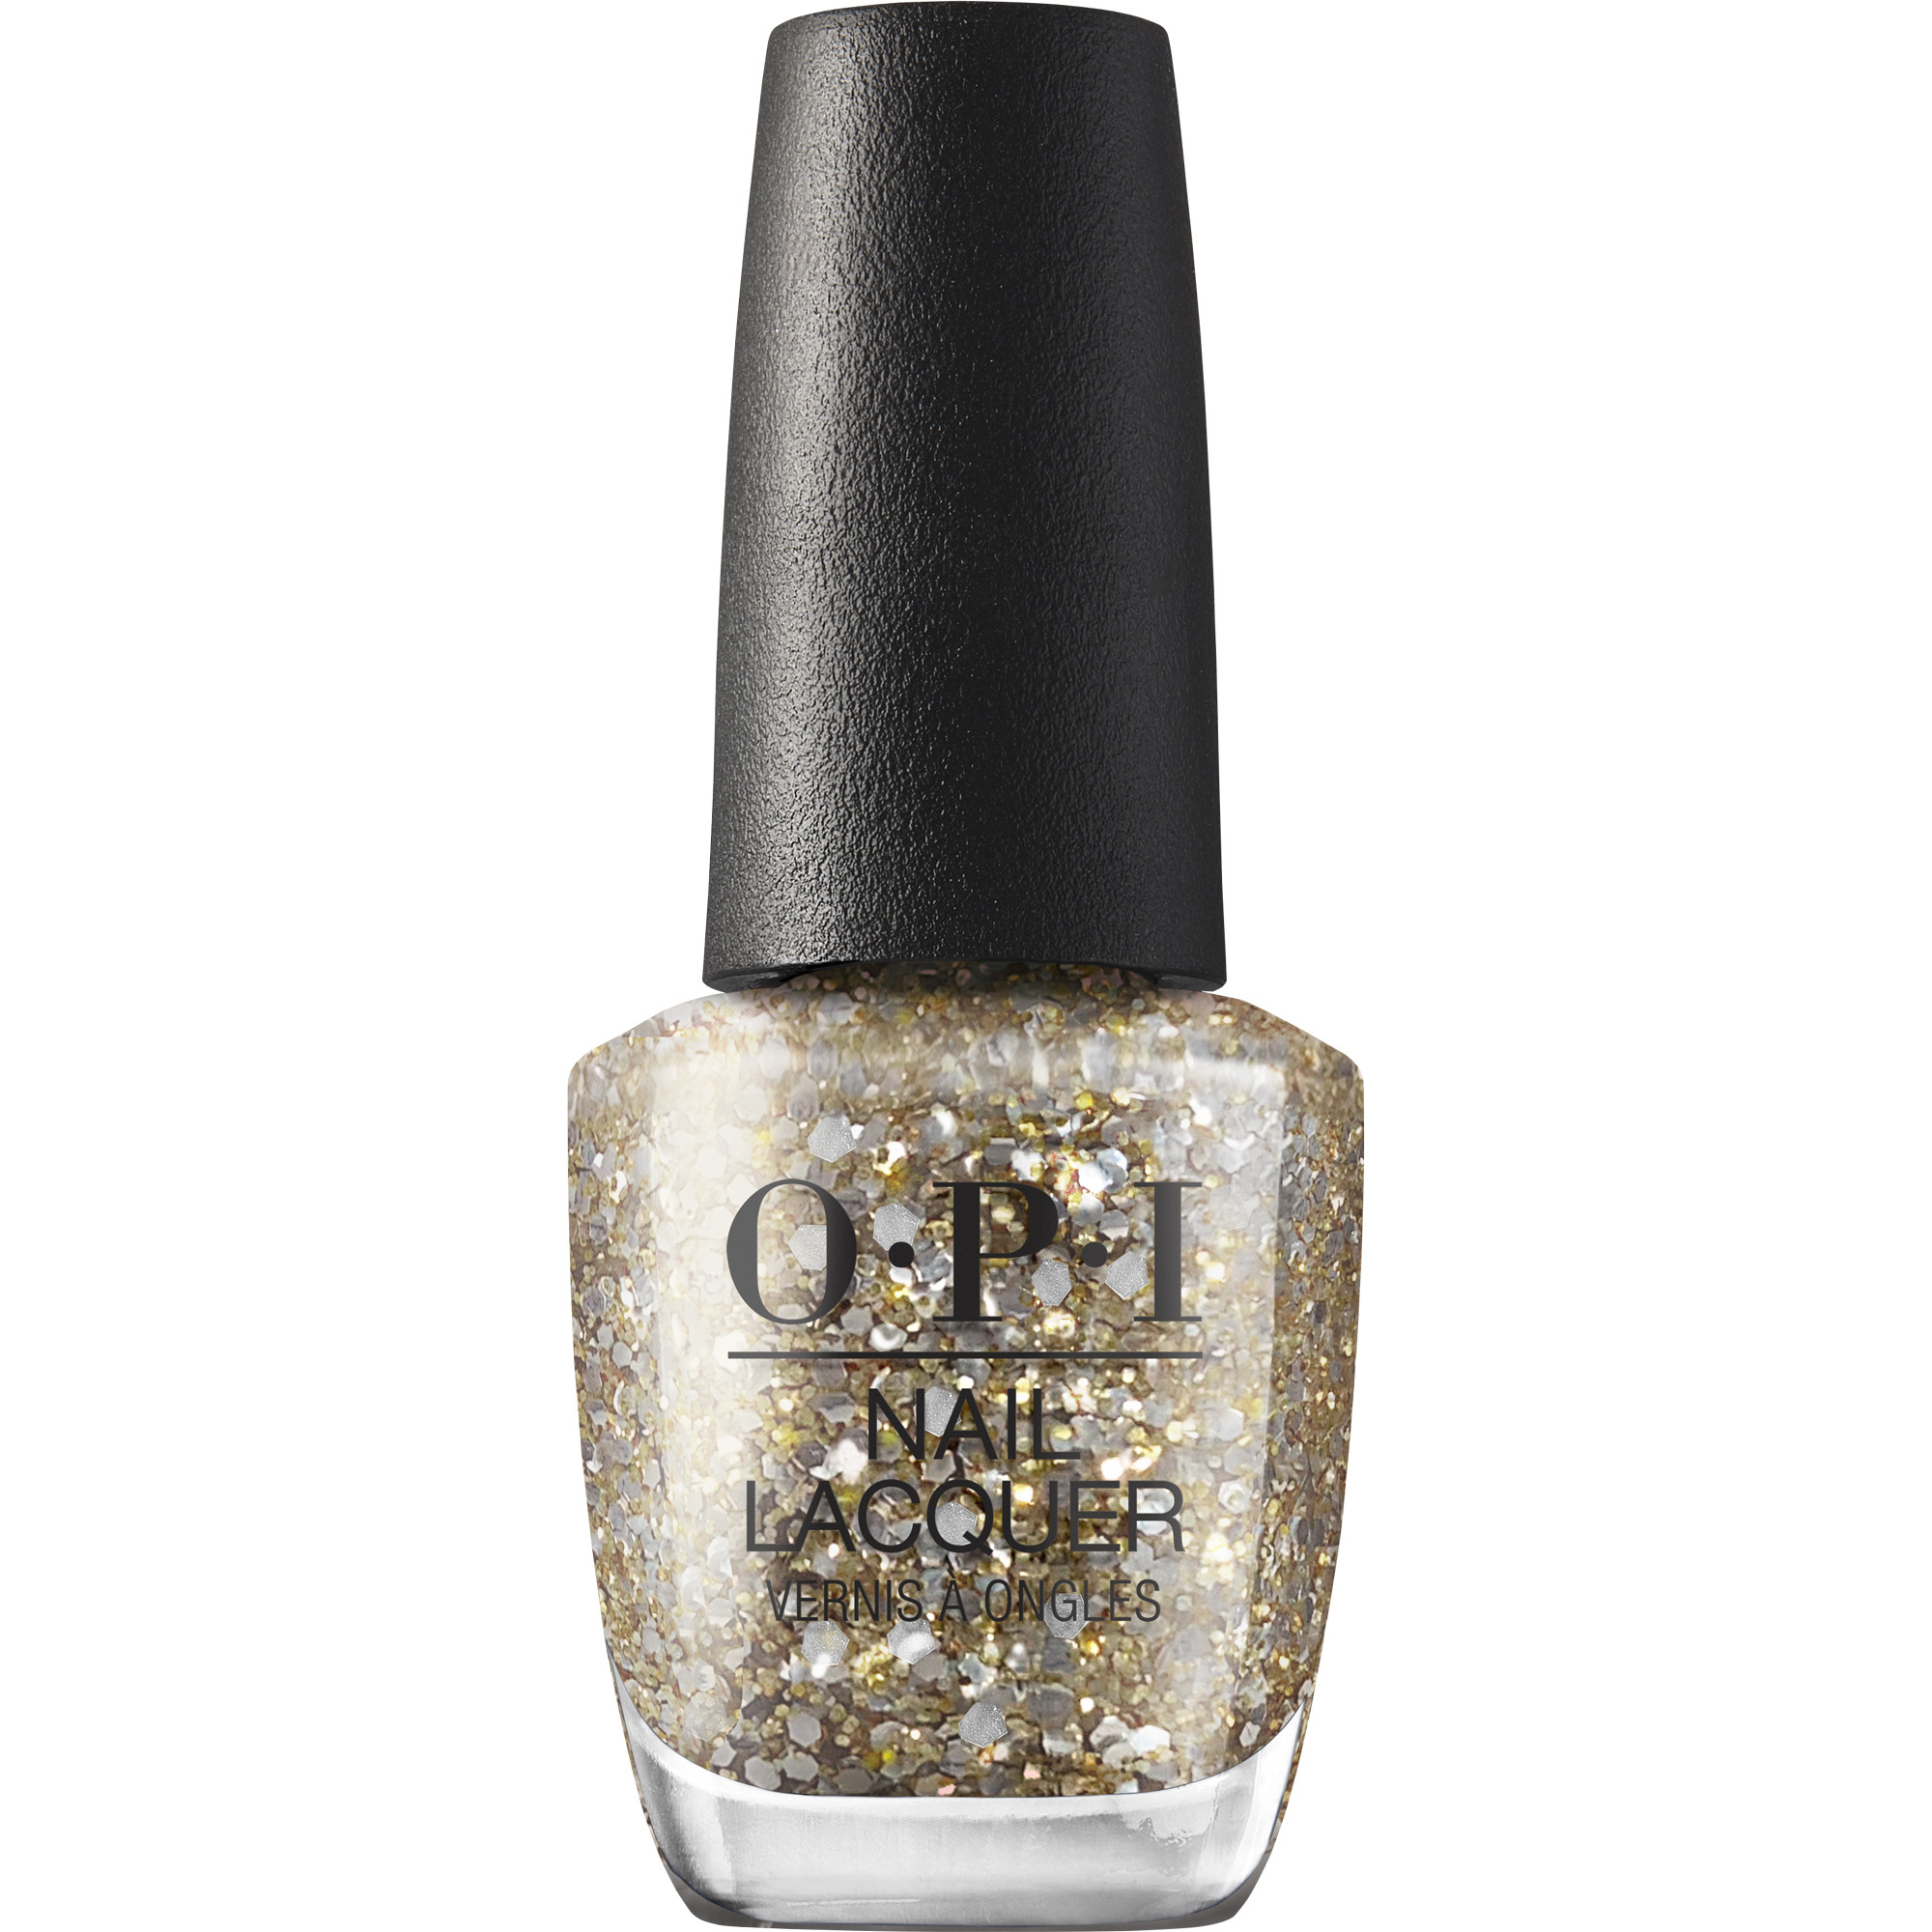 OPI Jewel Be Bold: Pop the Baubles 0.5oz